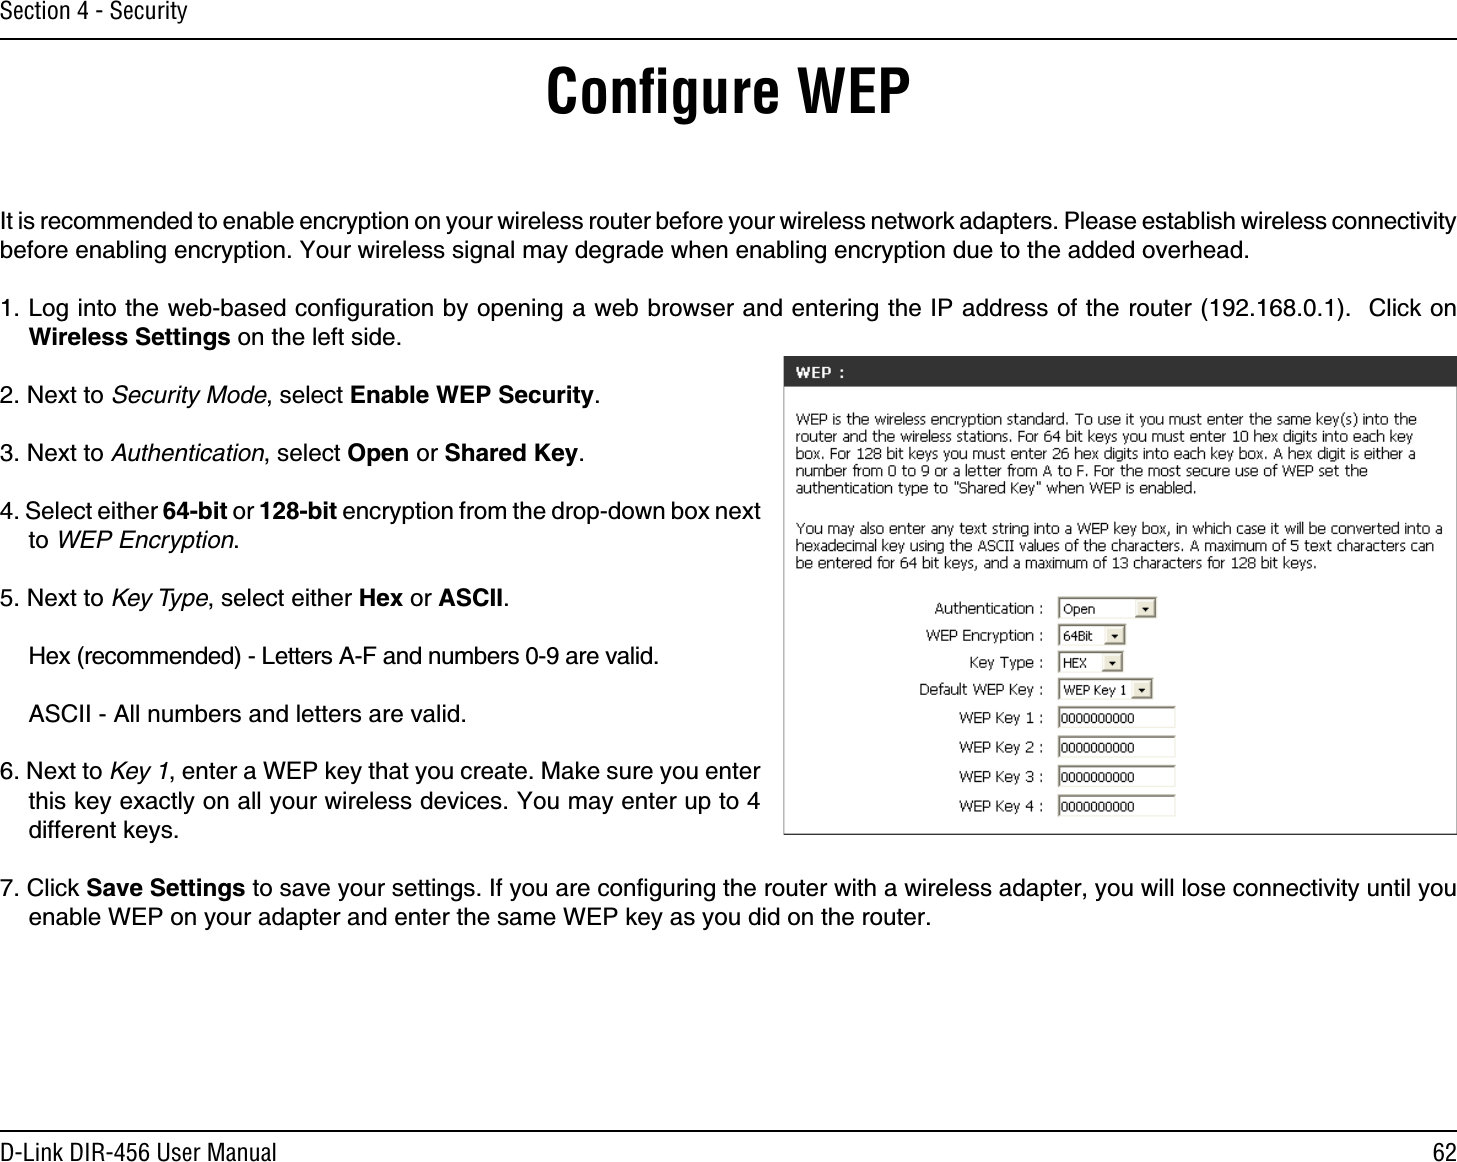 62D-Link DIR-456 User ManualSection 4 - SecurityConﬁgure WEPIt is recommended to enable encryption on your wireless router before your wireless network adapters. Please establish wireless connectivity before enabling encryption. Your wireless signal may degrade when enabling encryption due to the added overhead.1. Log into the web-based conﬁguration by opening a web browser and entering the IP address of the router (192.168.0.1).  Click on Wireless Settings on the left side.2. Next to Security Mode, select Enable WEP Security.3. Next to Authentication, select Open or Shared Key.4. Select either 64-bit or 128-bit encryption from the drop-down box next to WEP Encryption. 5. Next to Key Type, select either Hex or ASCII.  Hex (recommended) - Letters A-F and numbers 0-9 are valid.  ASCII - All numbers and letters are valid.6. Next to Key 1, enter a WEP key that you create. Make sure you enter this key exactly on all your wireless devices. You may enter up to 4 different keys.7. Click Save Settings to save your settings. If you are conﬁguring the router with a wireless adapter, you will lose connectivity until you enable WEP on your adapter and enter the same WEP key as you did on the router.